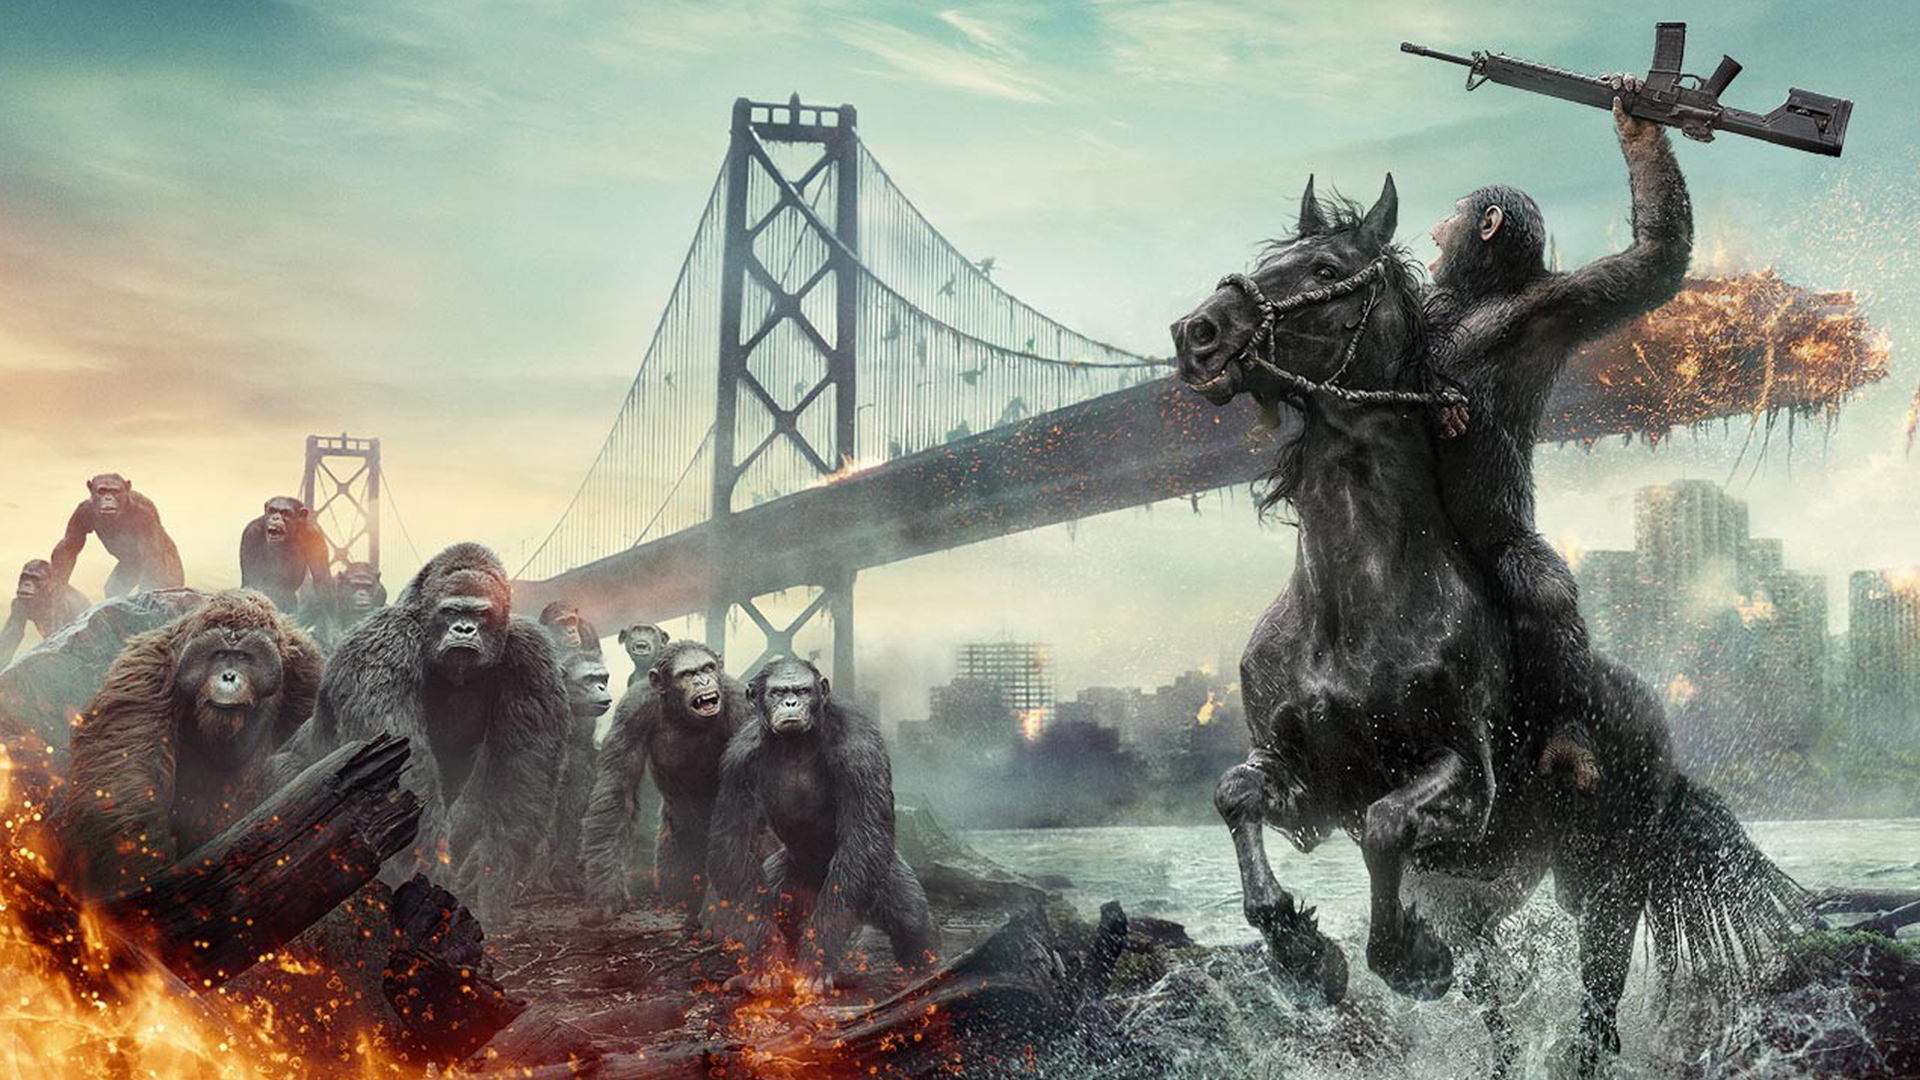 Dawn of the Planet of the Apes Wallpaper 1920x1080 by